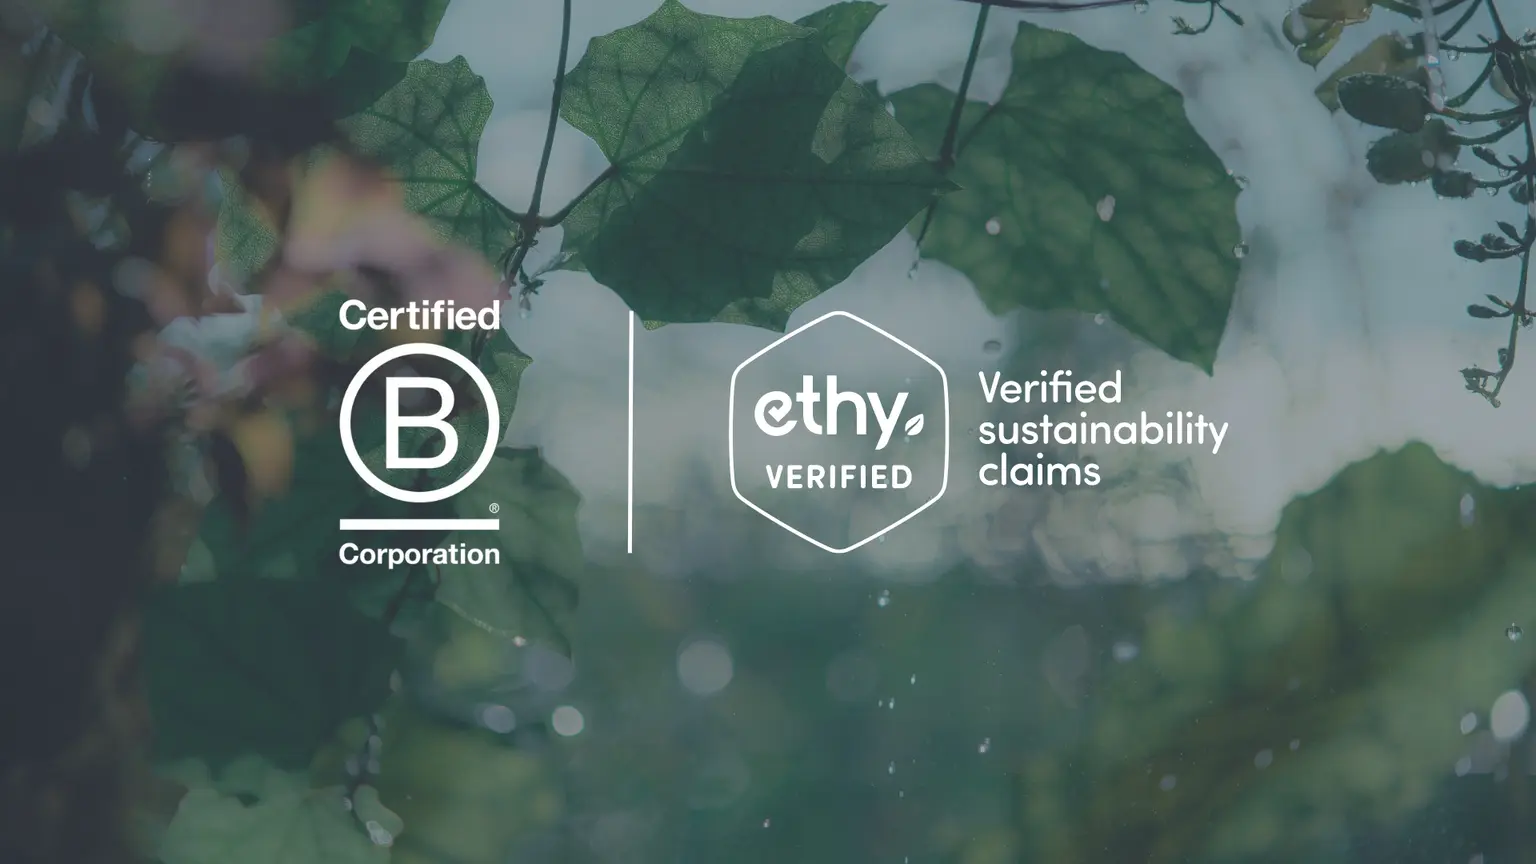 ethy and B Corp share a common vision of a business landscape that operates sustainably and impacts positively on people, communities and the planet. Yet despite these common goals, there are some key differences in approach and result.